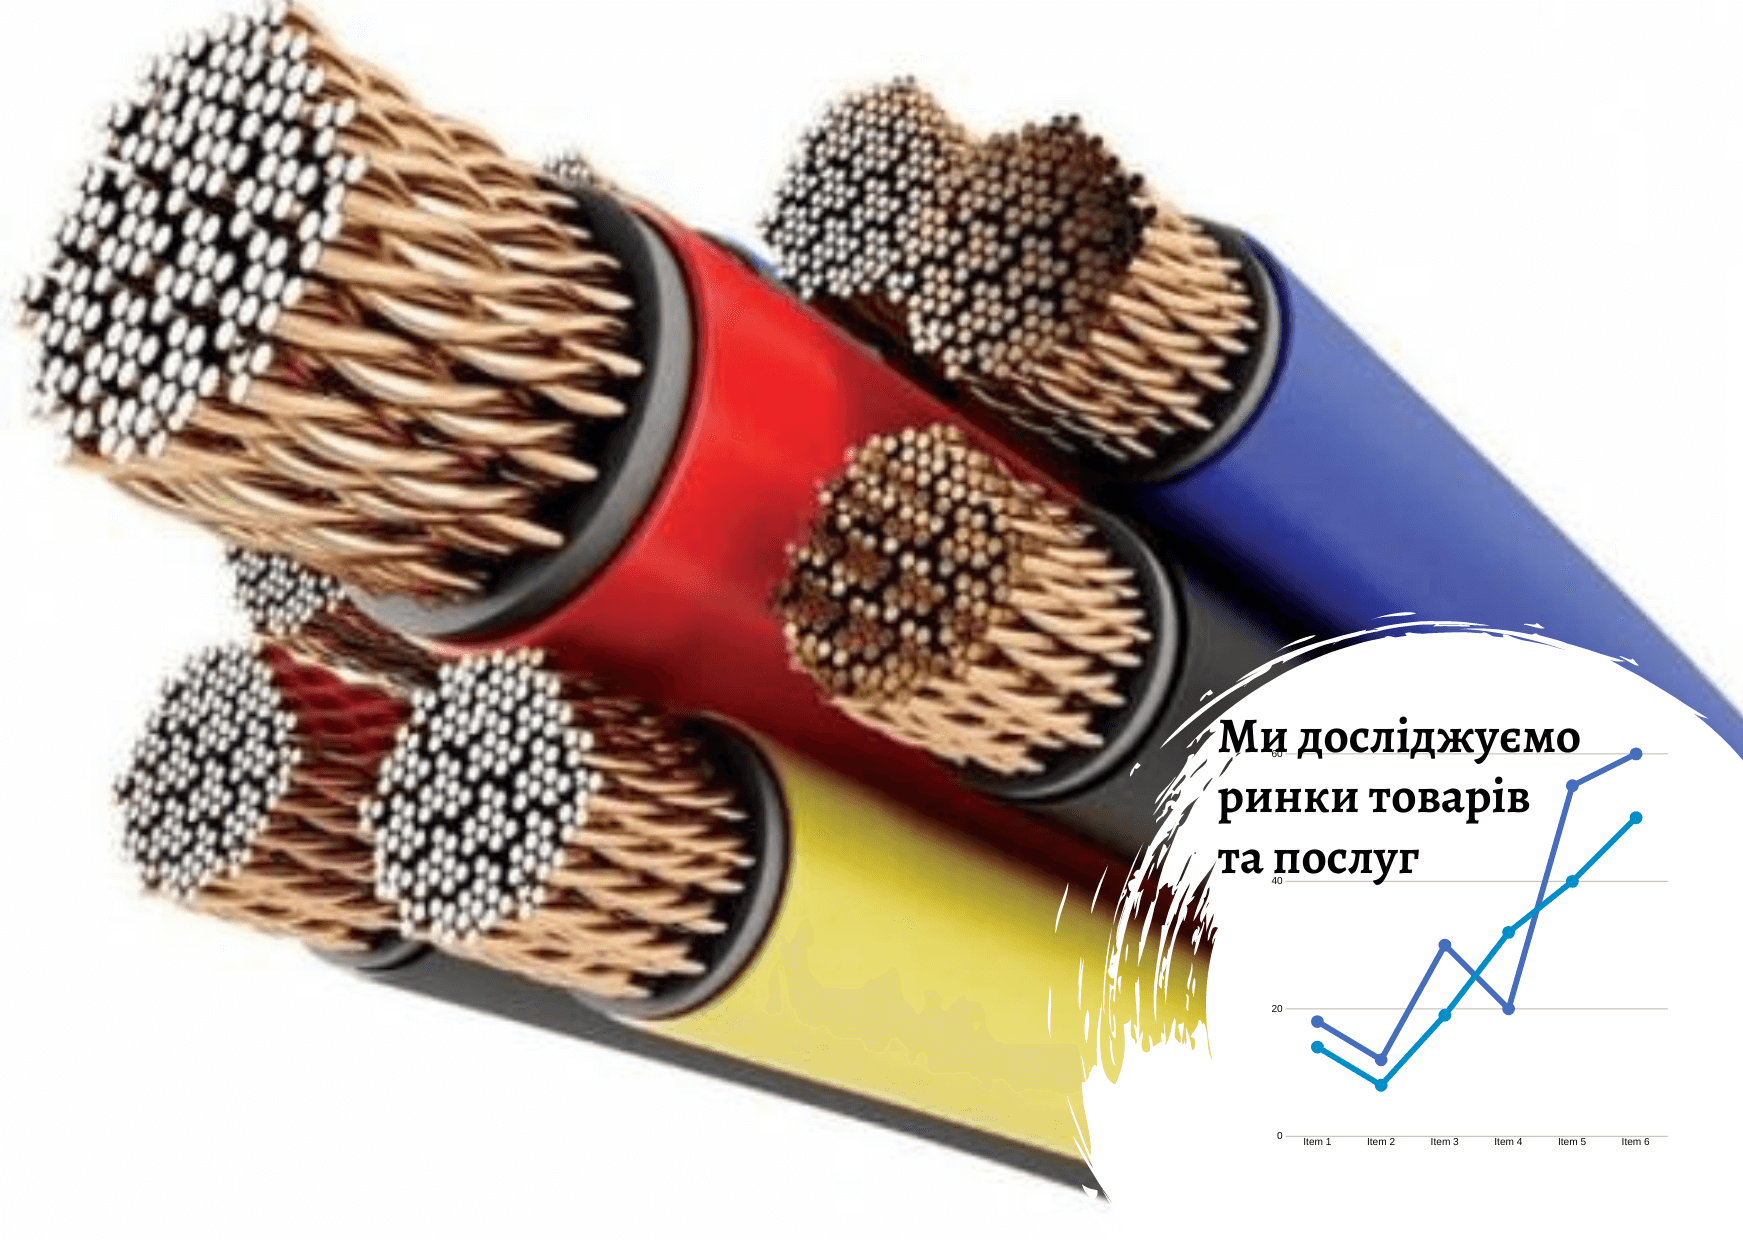 Ukrainian high-voltage cables market in 2022 - Pro-Consulting